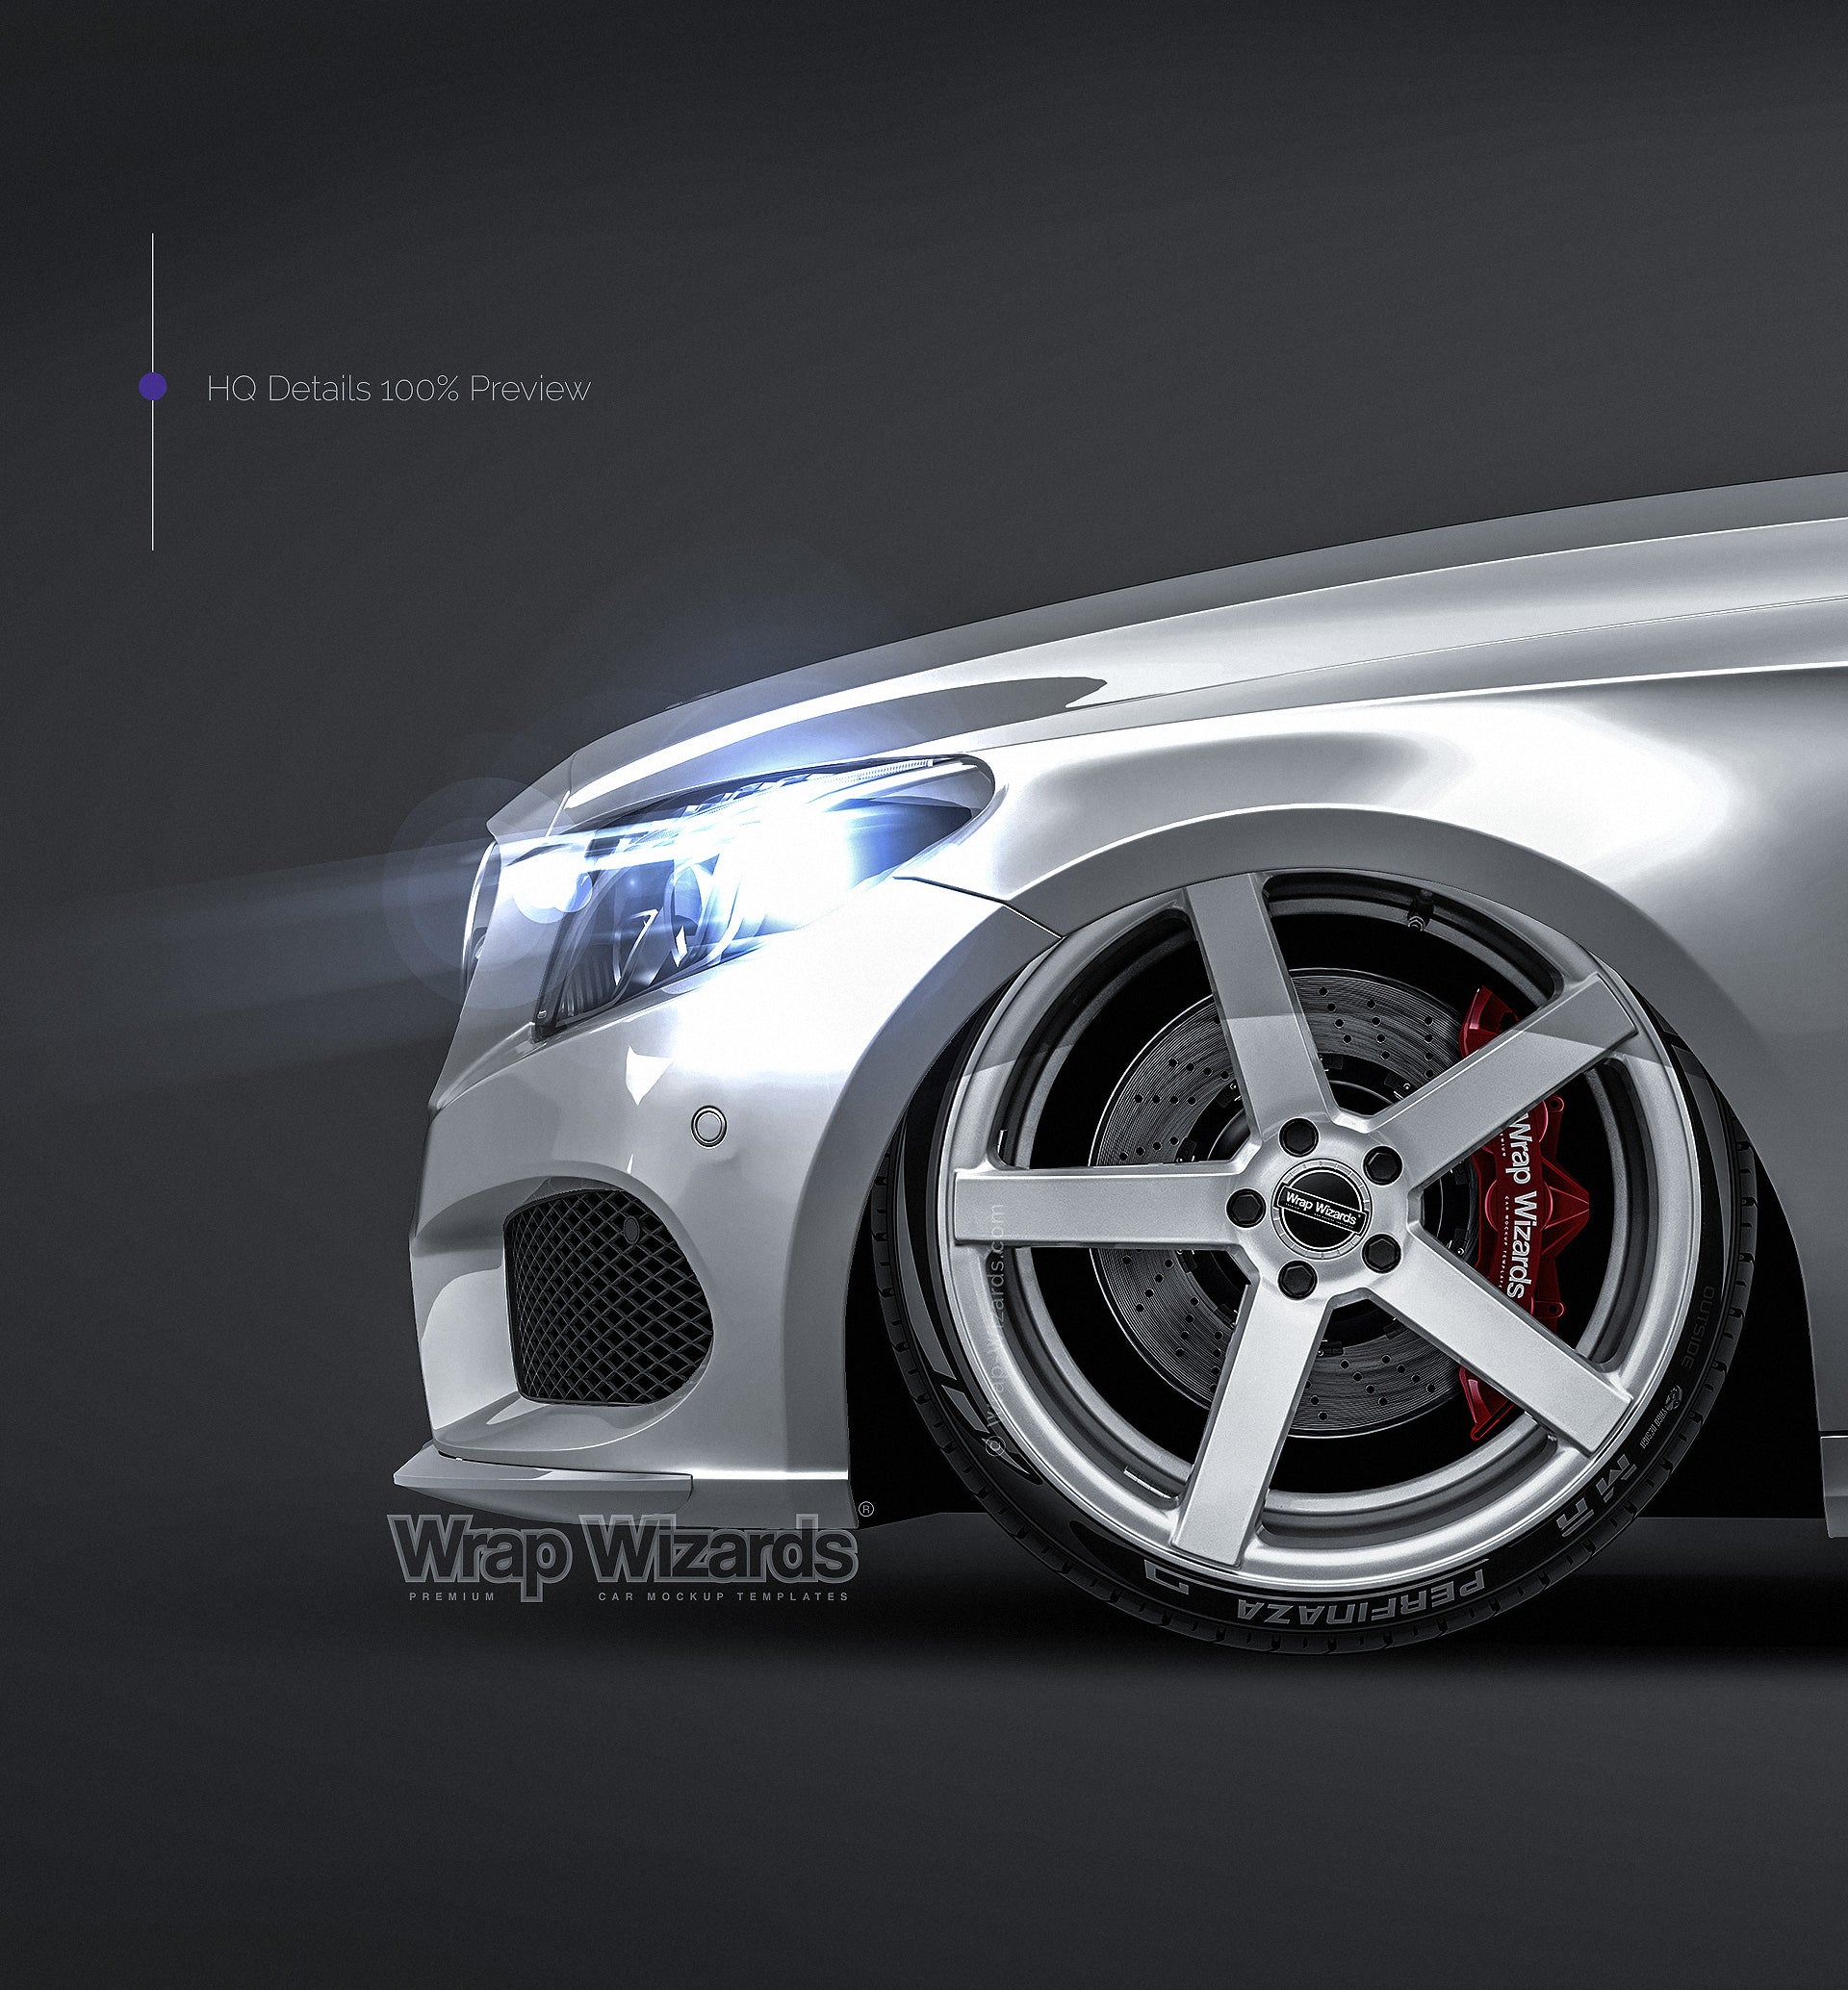 Mercedes-Benz C-class Coupe 2017 glossy finish - all sides Car Mockup Template.psd